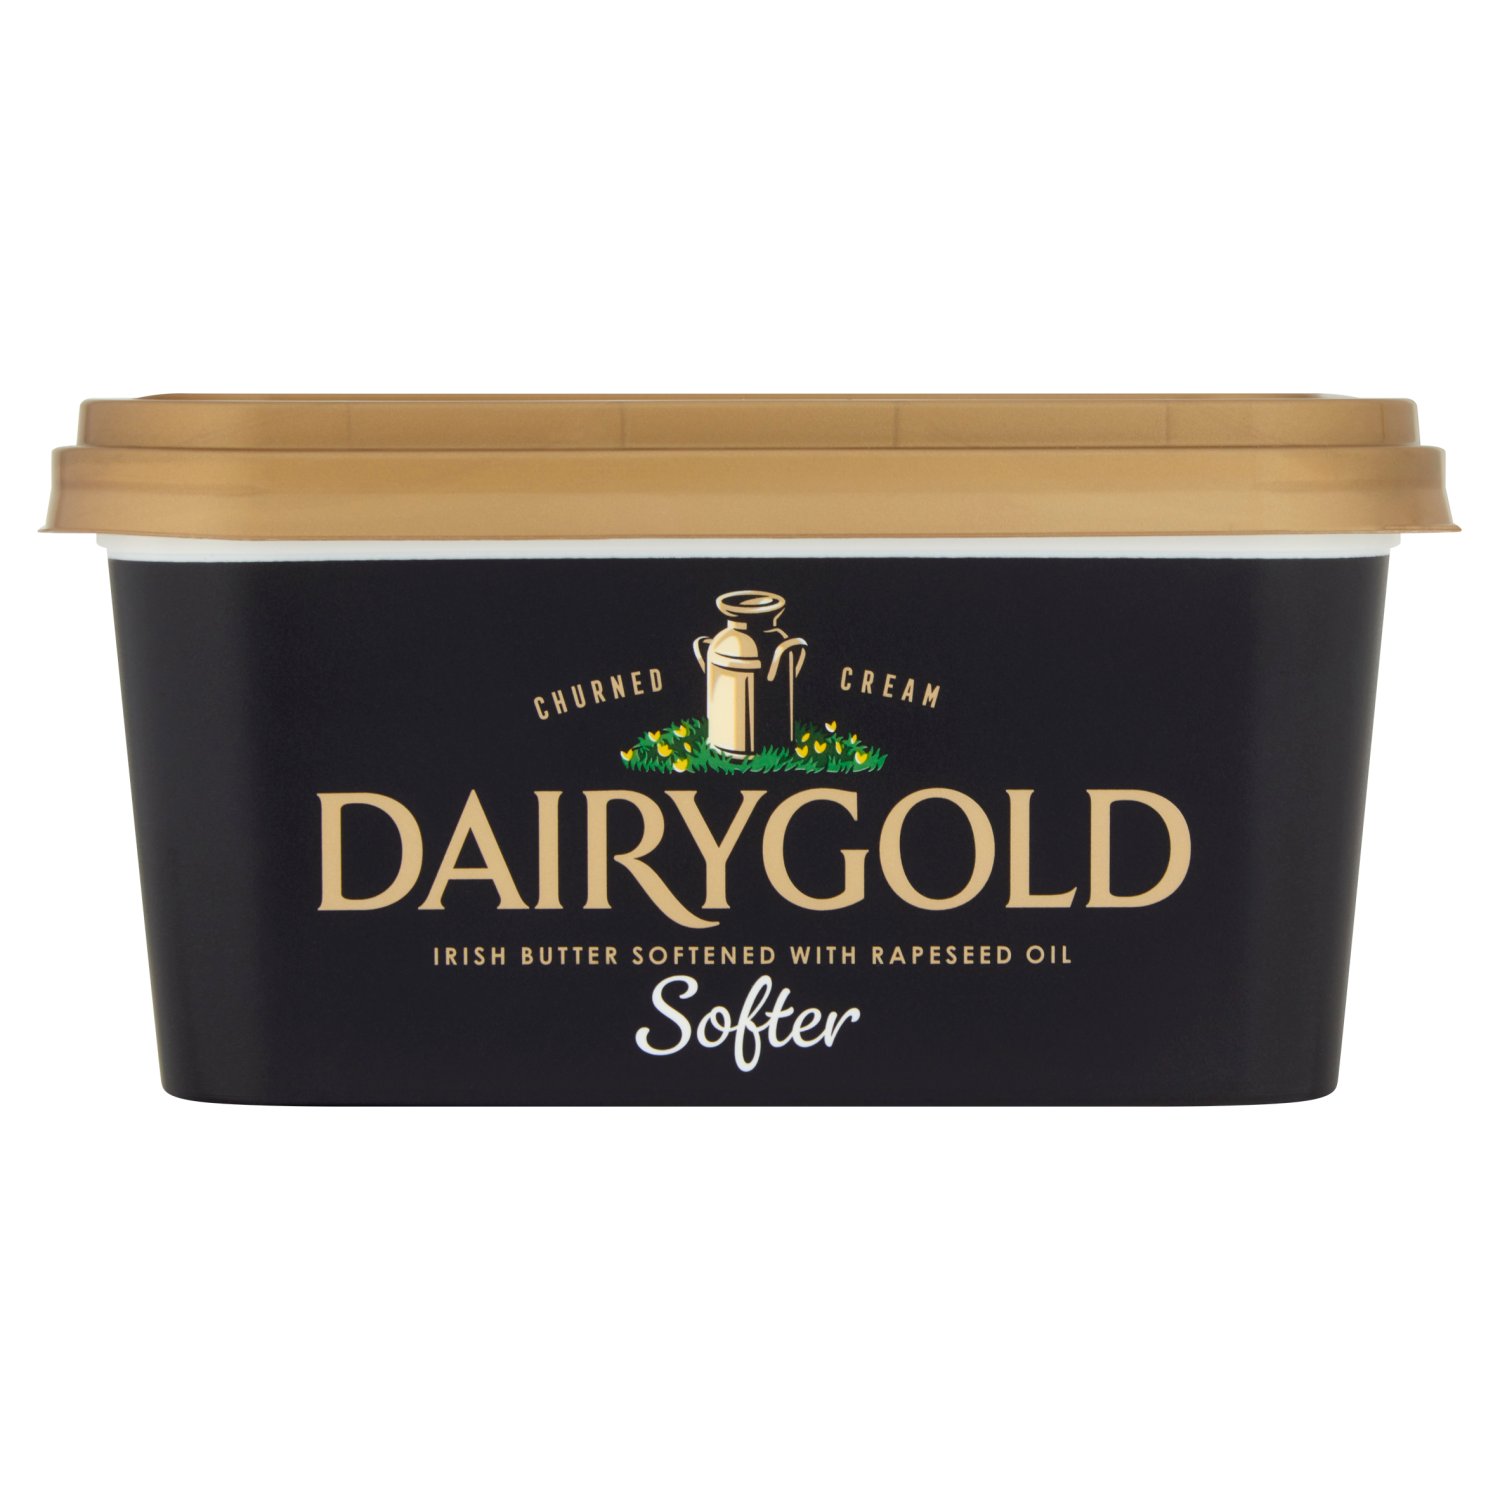 Dairygold has been in hearts and homes around Ireland for 30 years.